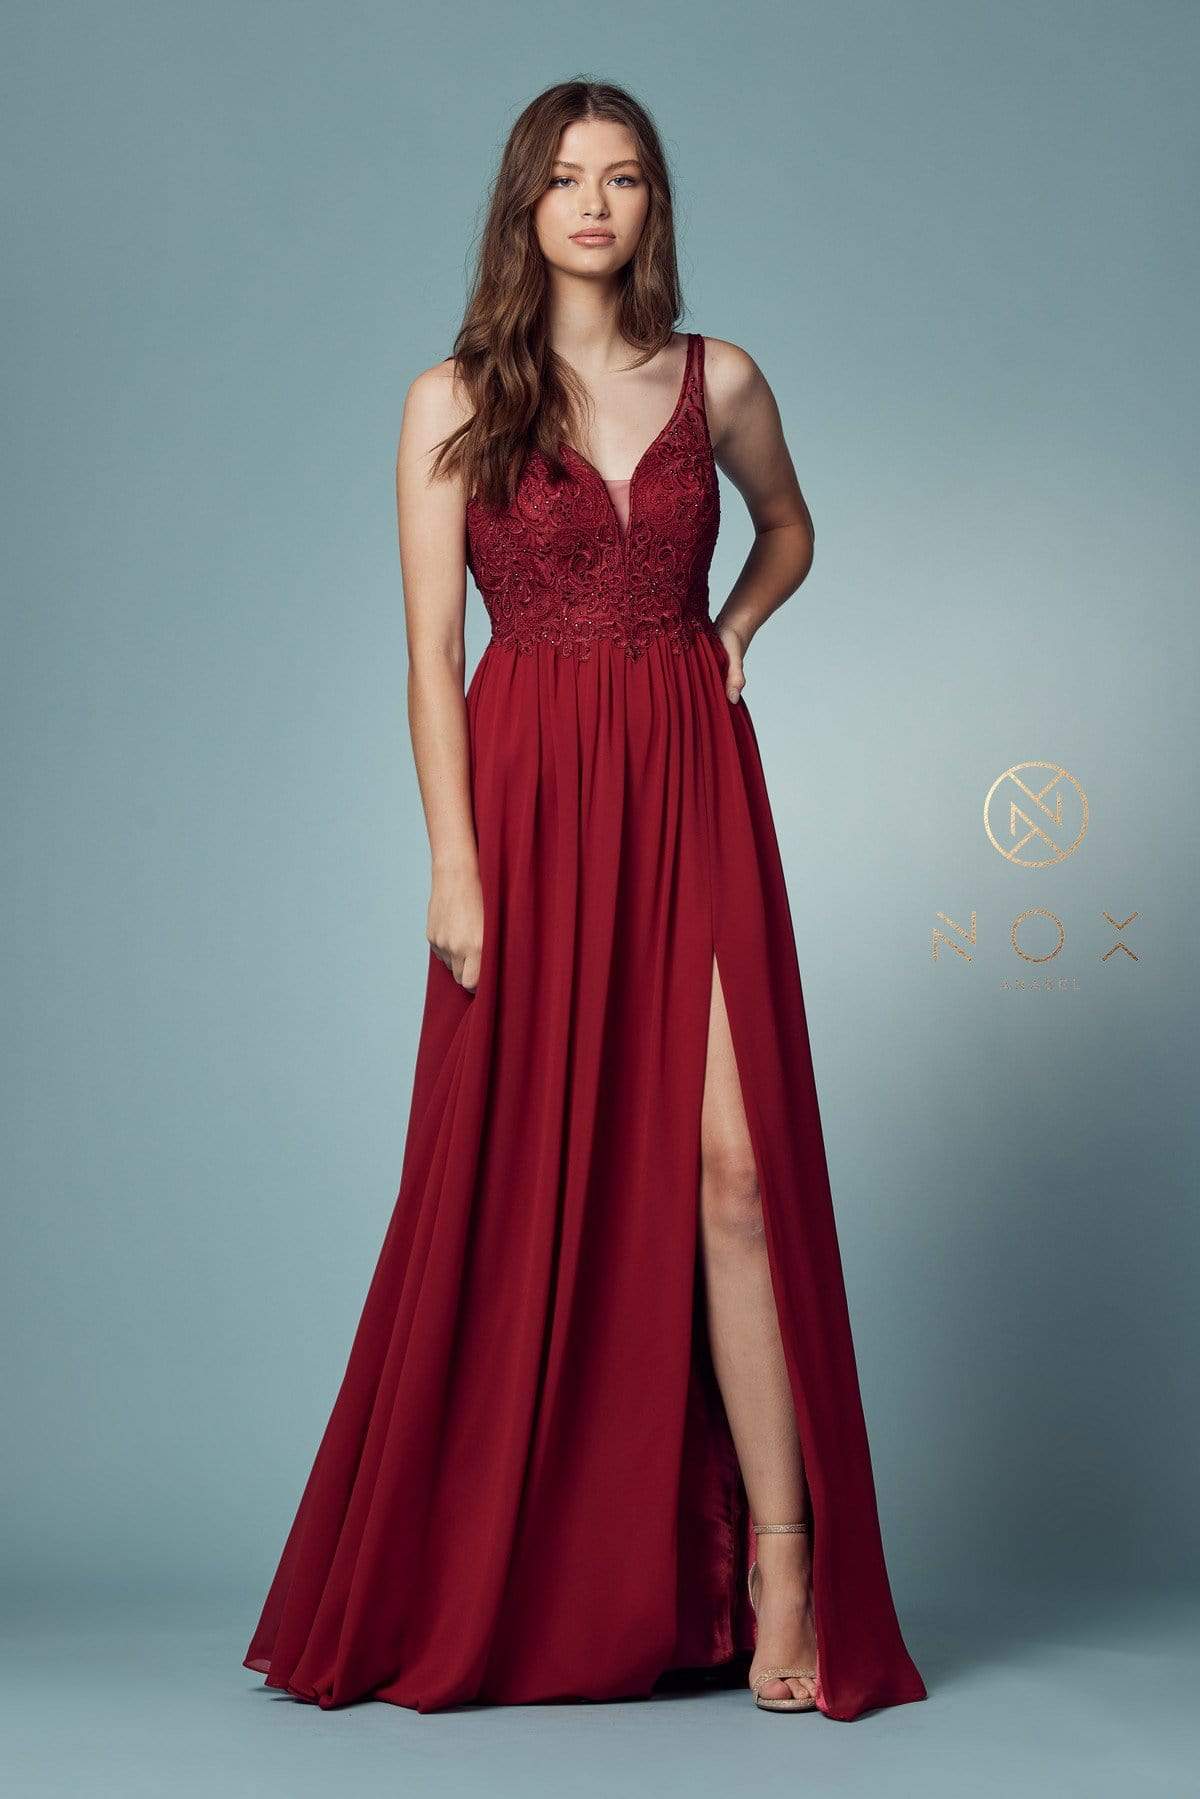 Image of Nox Anabel - Y299 Sleeveless Beaded Lace Applique Bodice A-Line Gown